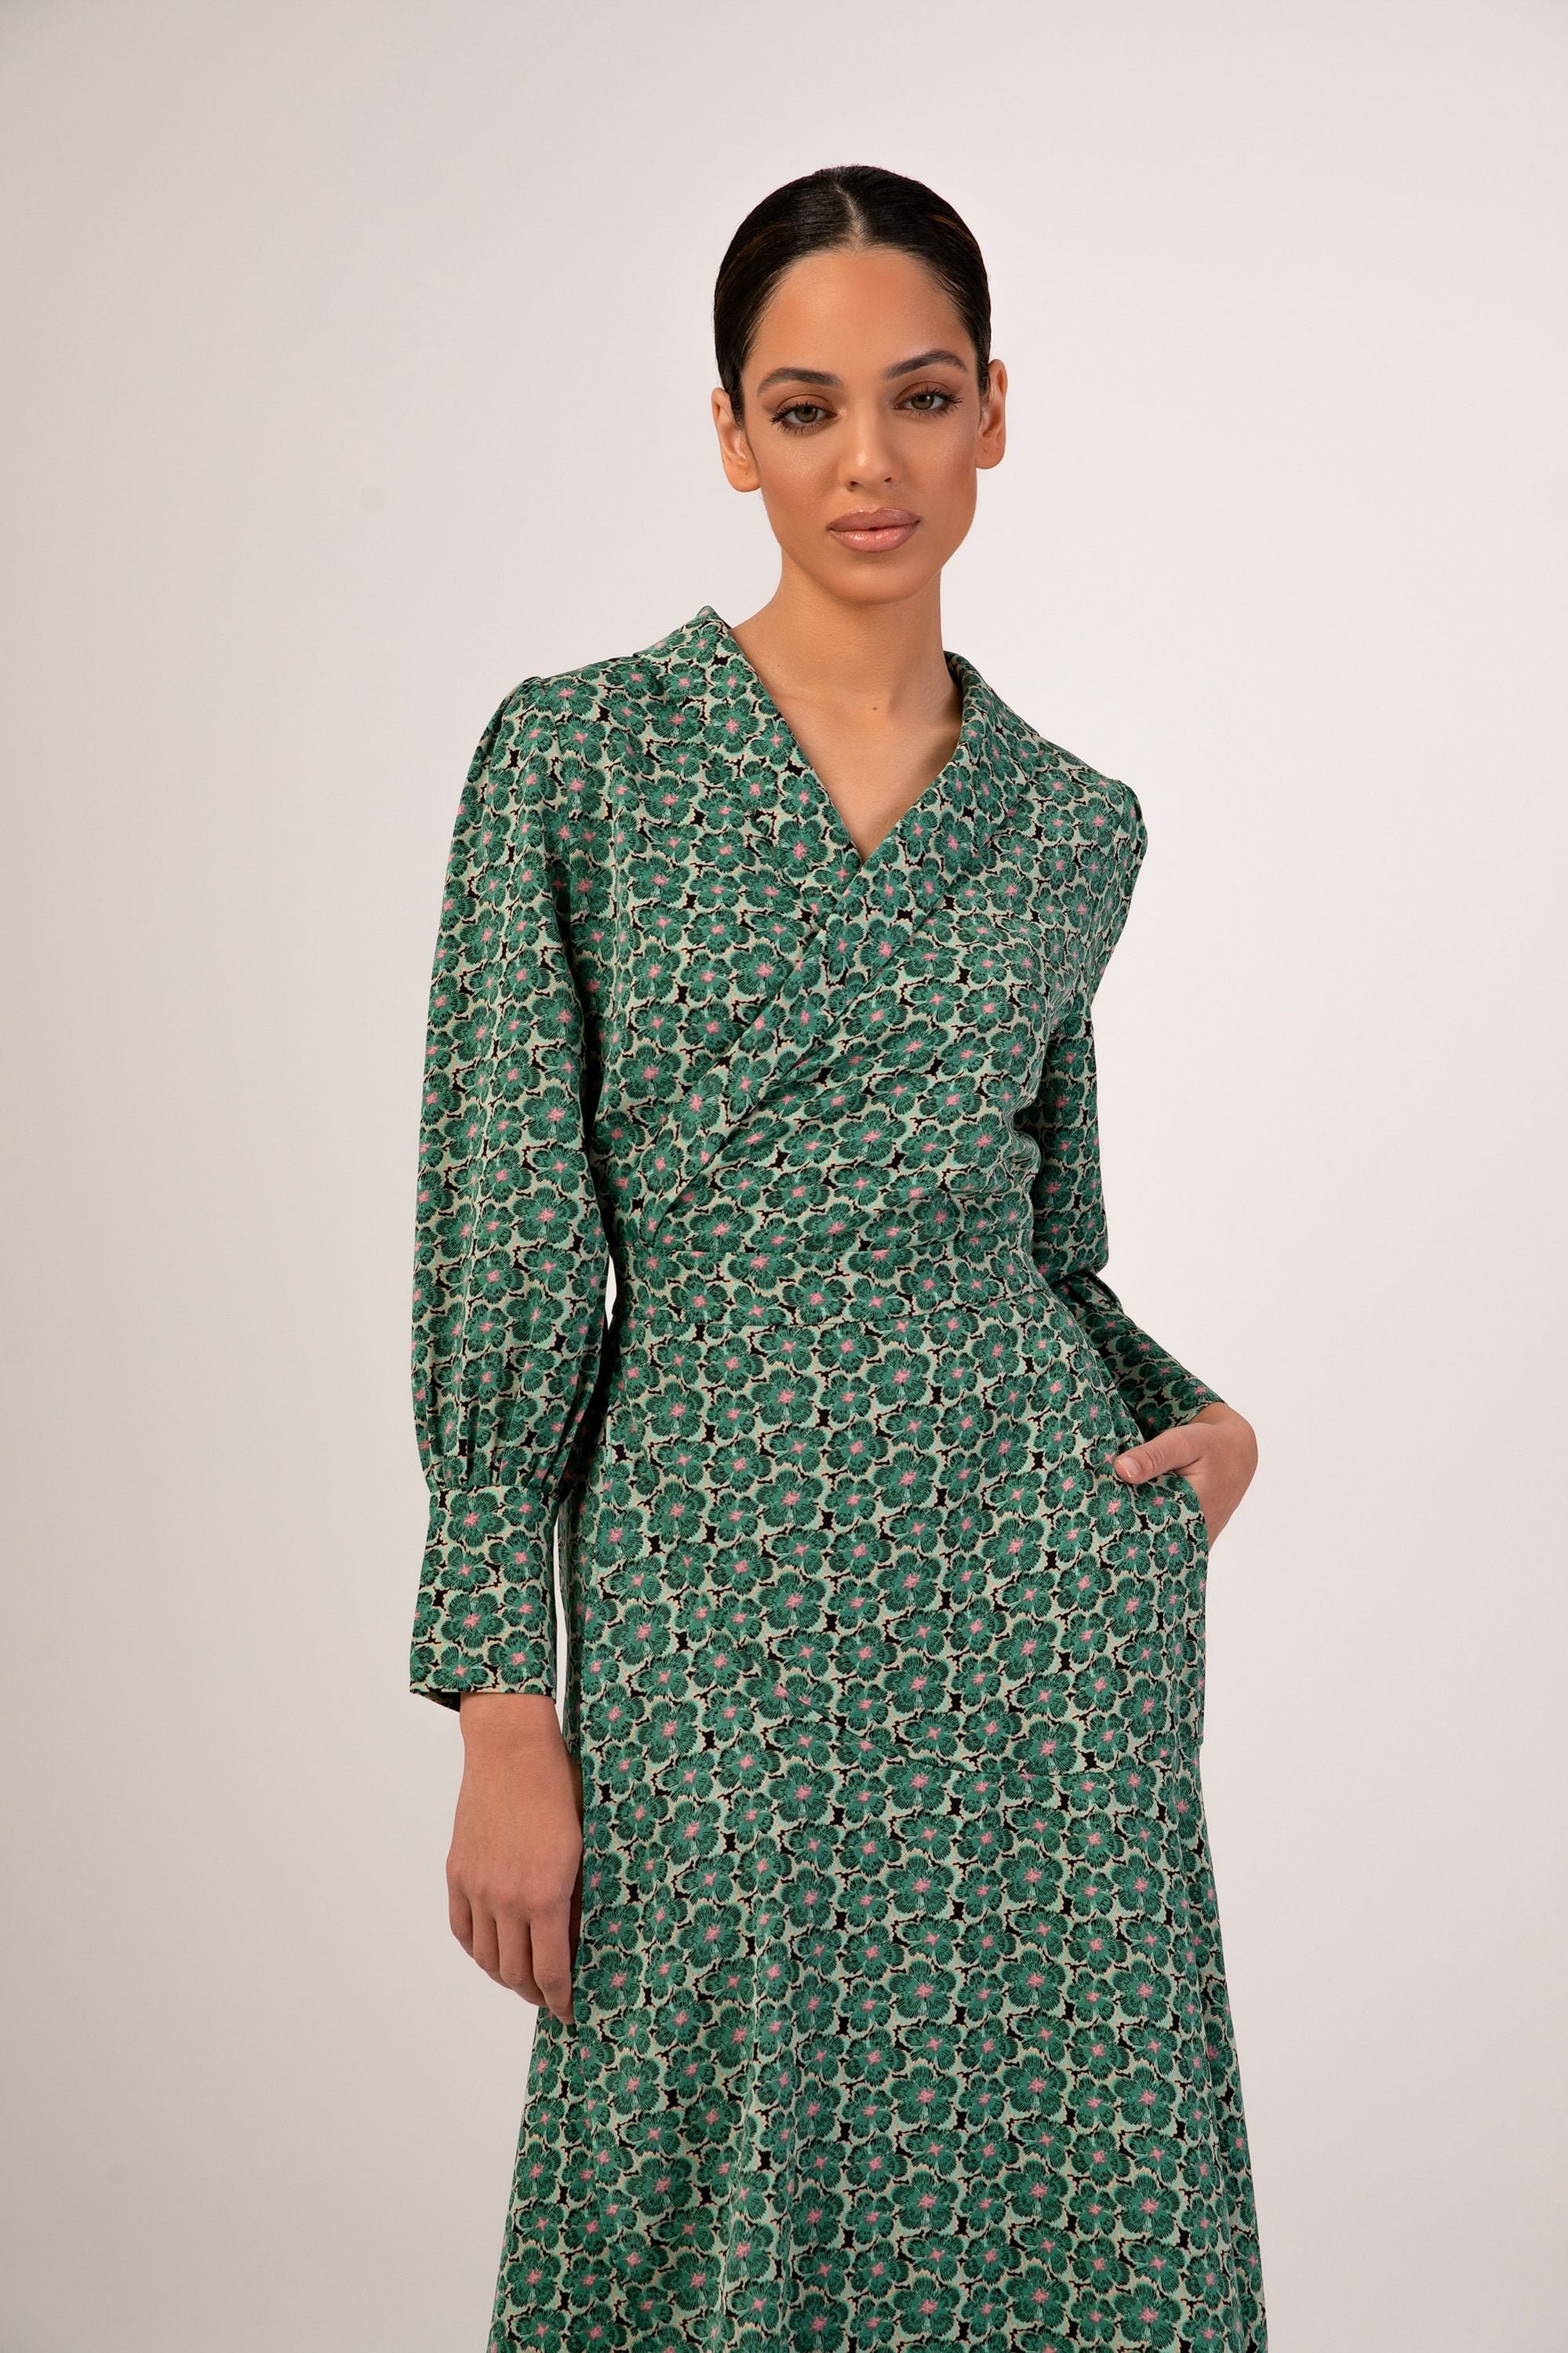 Women's Long Sleeve Floral Maxi Dress With Pockets - Personalized Gifts &  Engraved Gifts for Any Occasions from Justyling